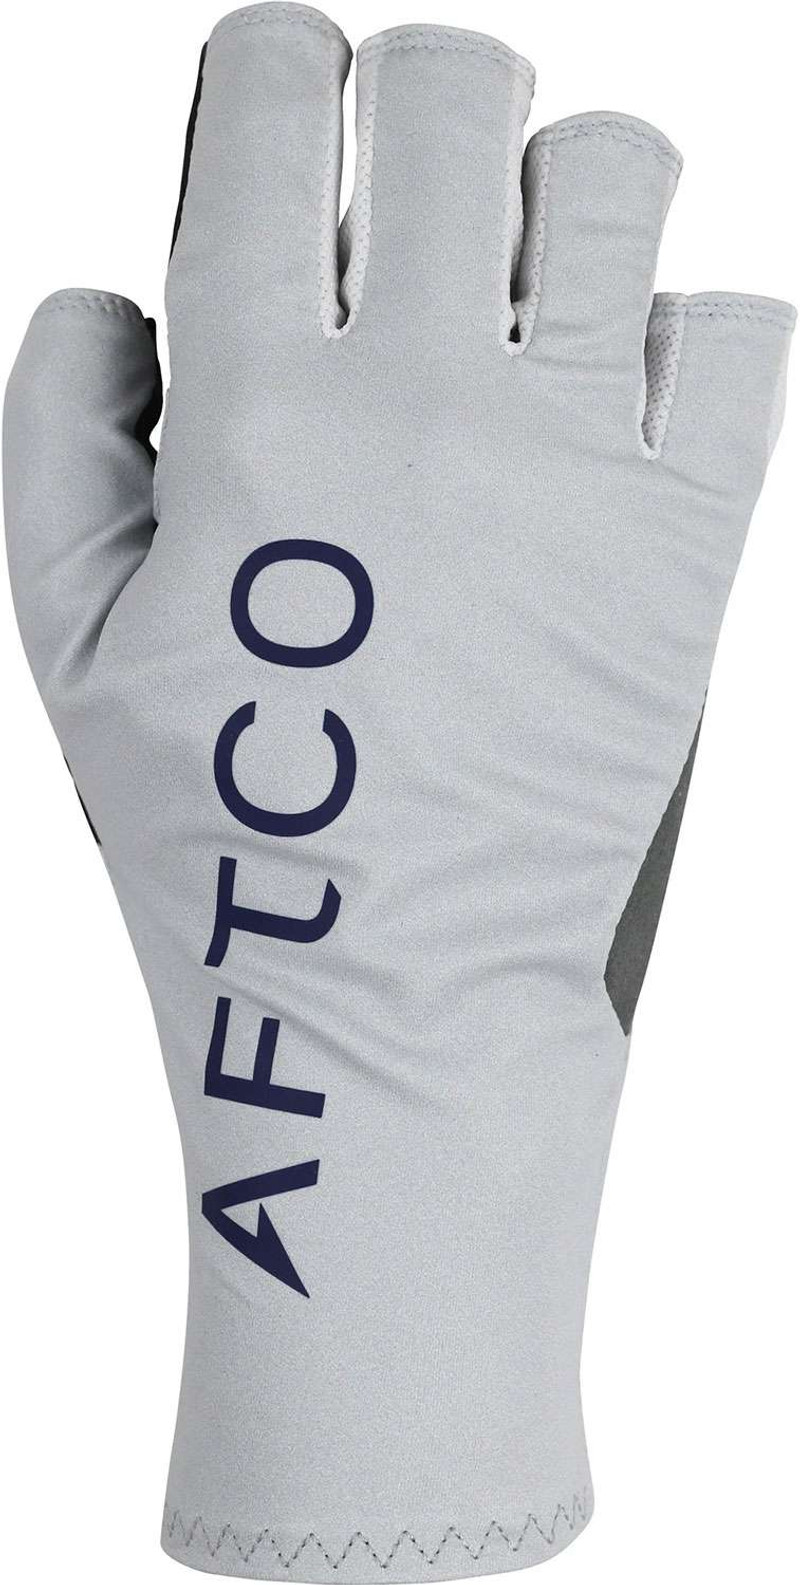 Aftco SolPro Gloves - TackleDirect